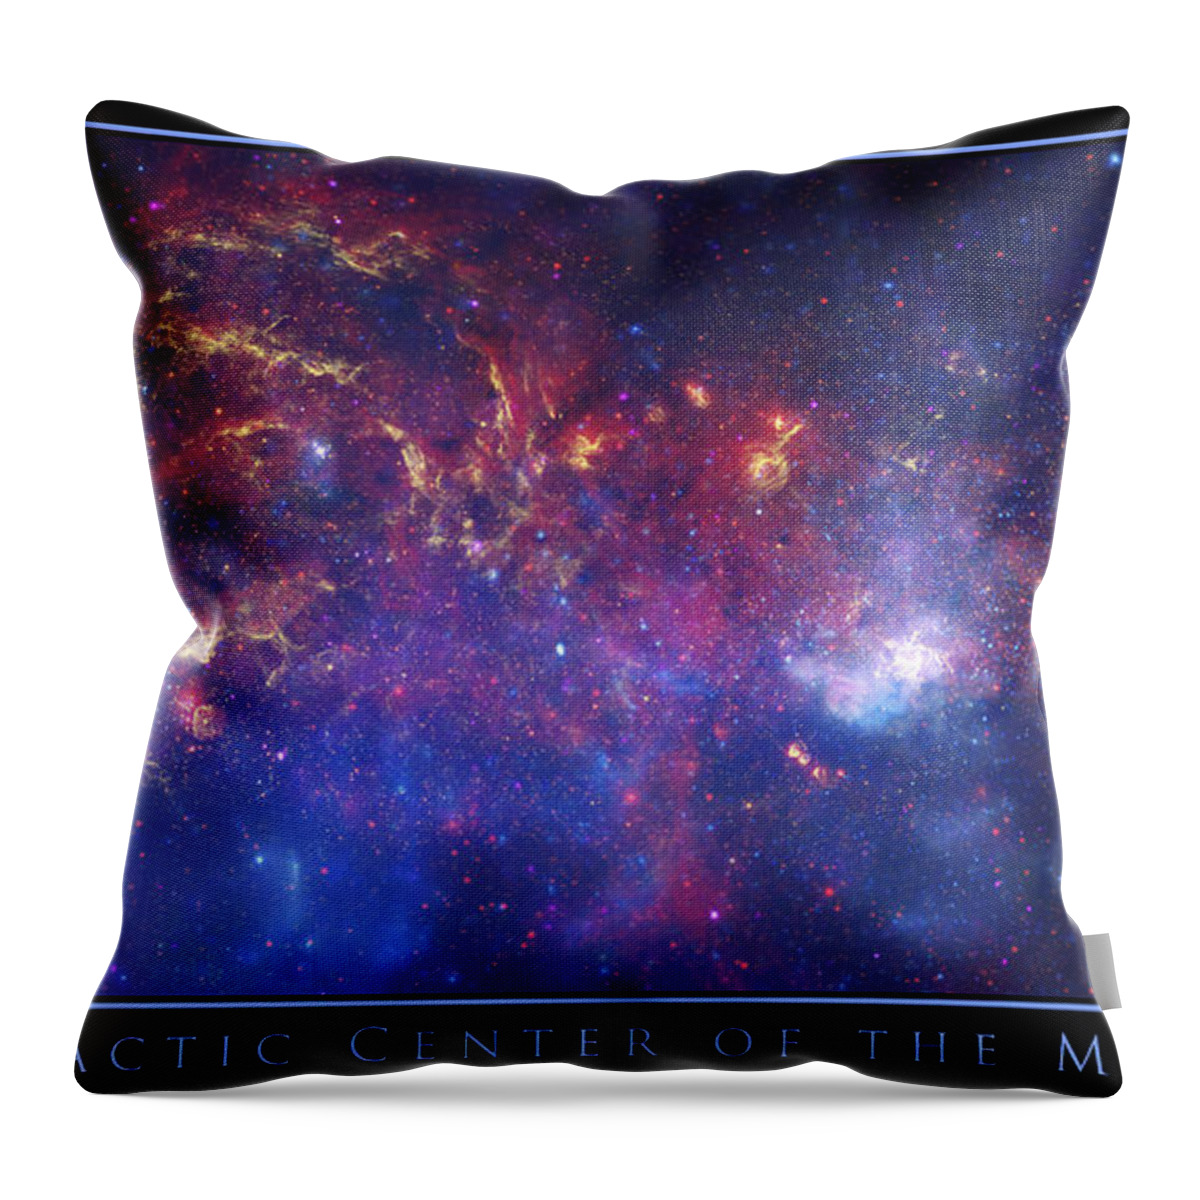 The Galactic Center Of The Milky Way Throw Pillow featuring the photograph The Galactic Center of the Milky Way by Adam Mateo Fierro